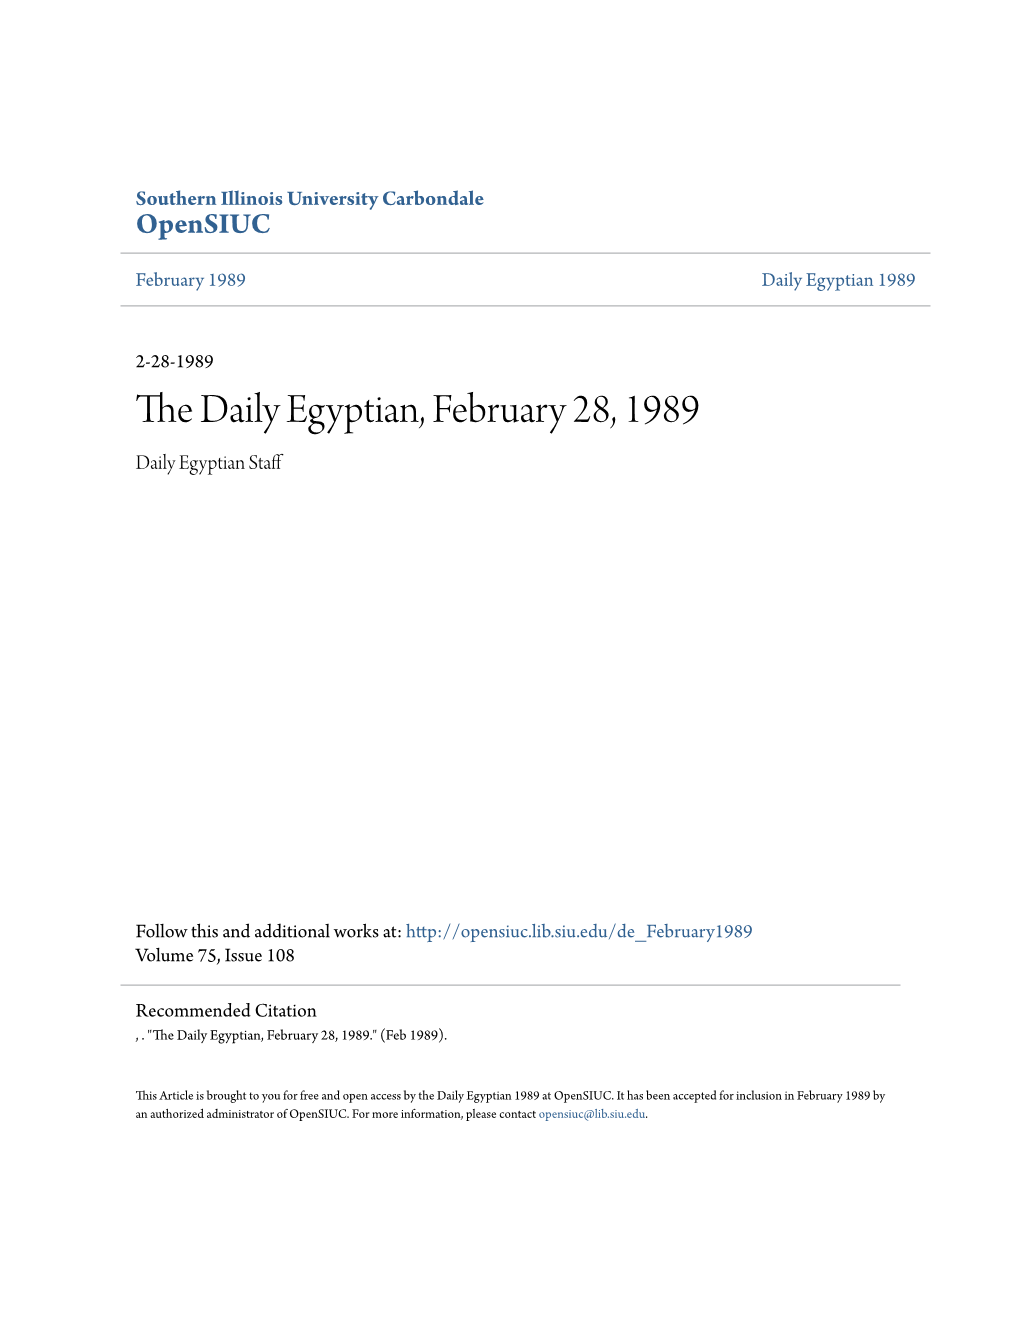 The Daily Egyptian, February 28, 1989